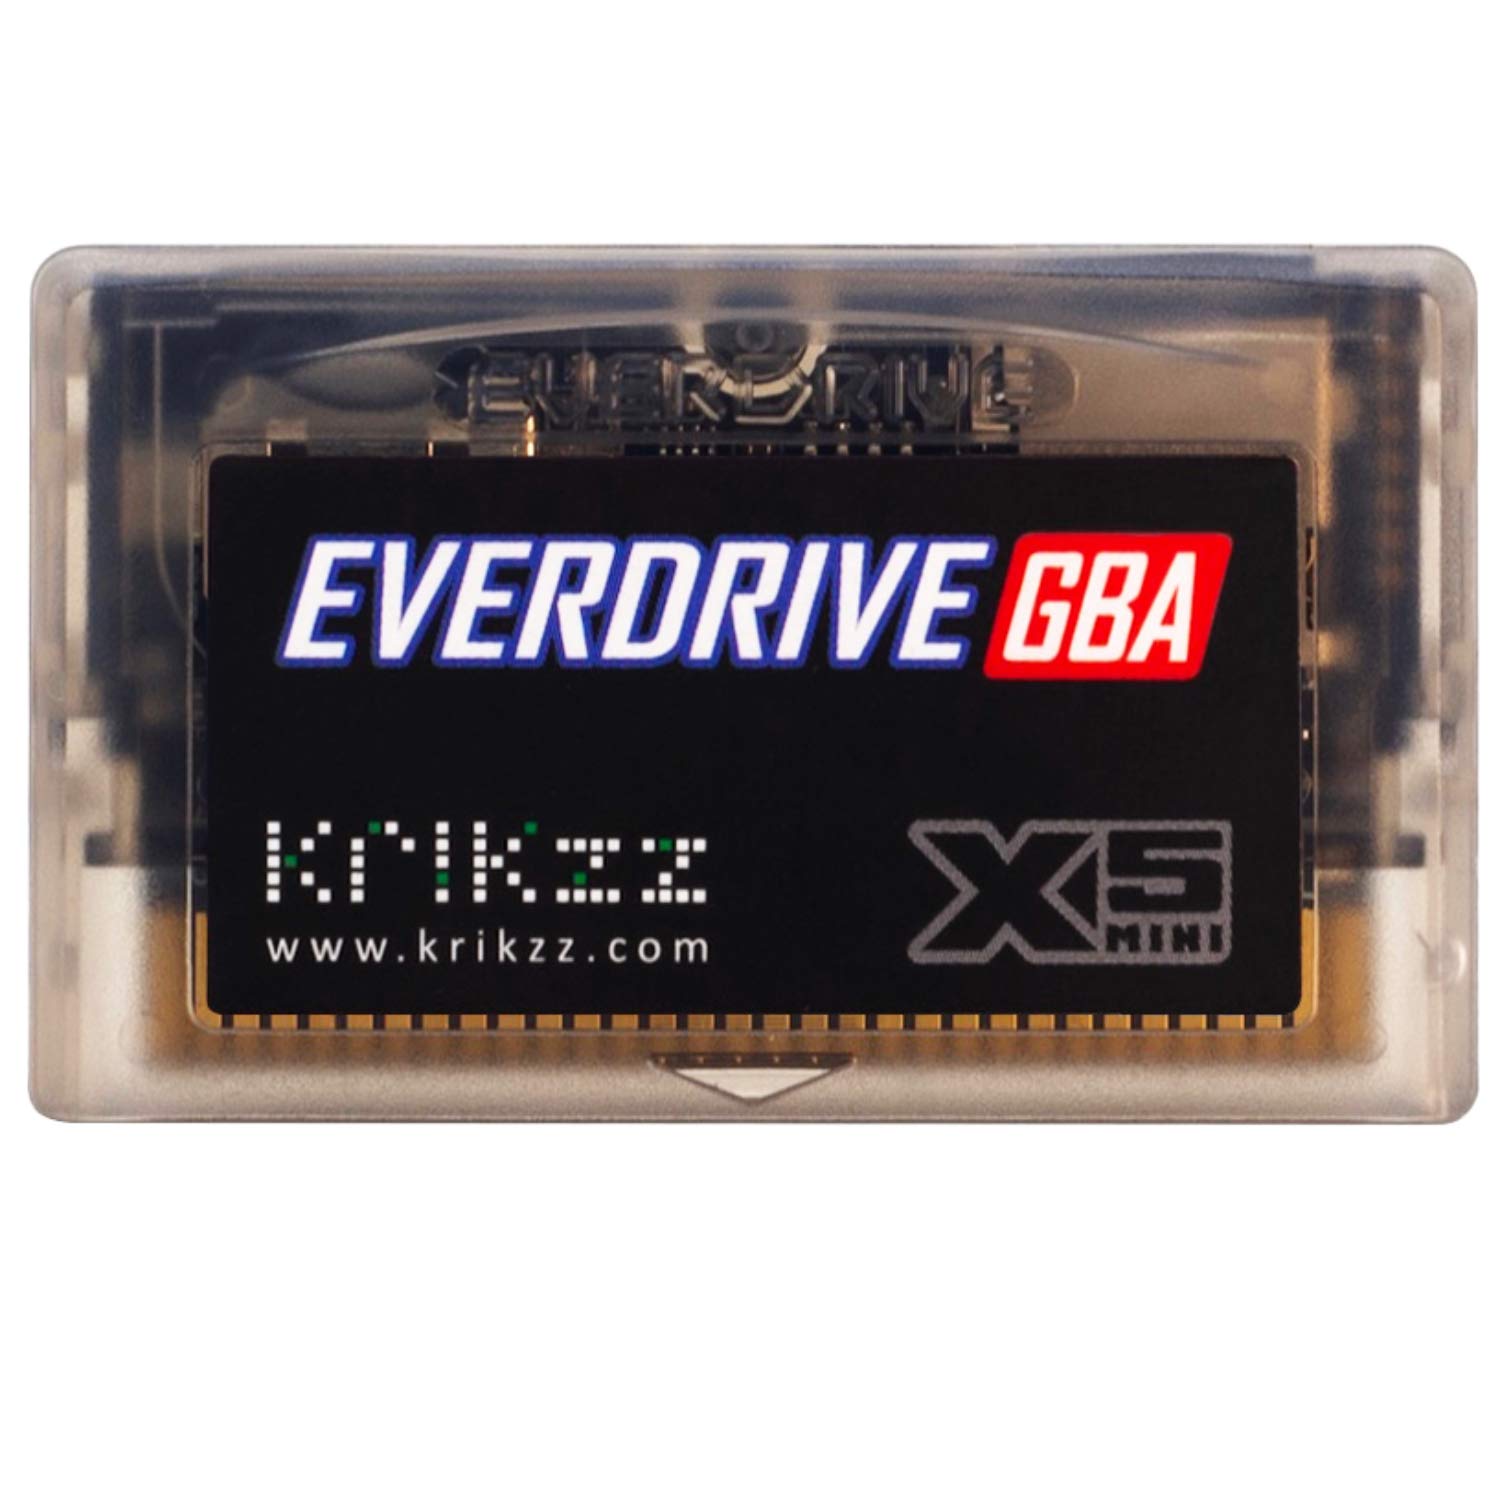 The Everdrive GBA X5 Complete Game Library Set 